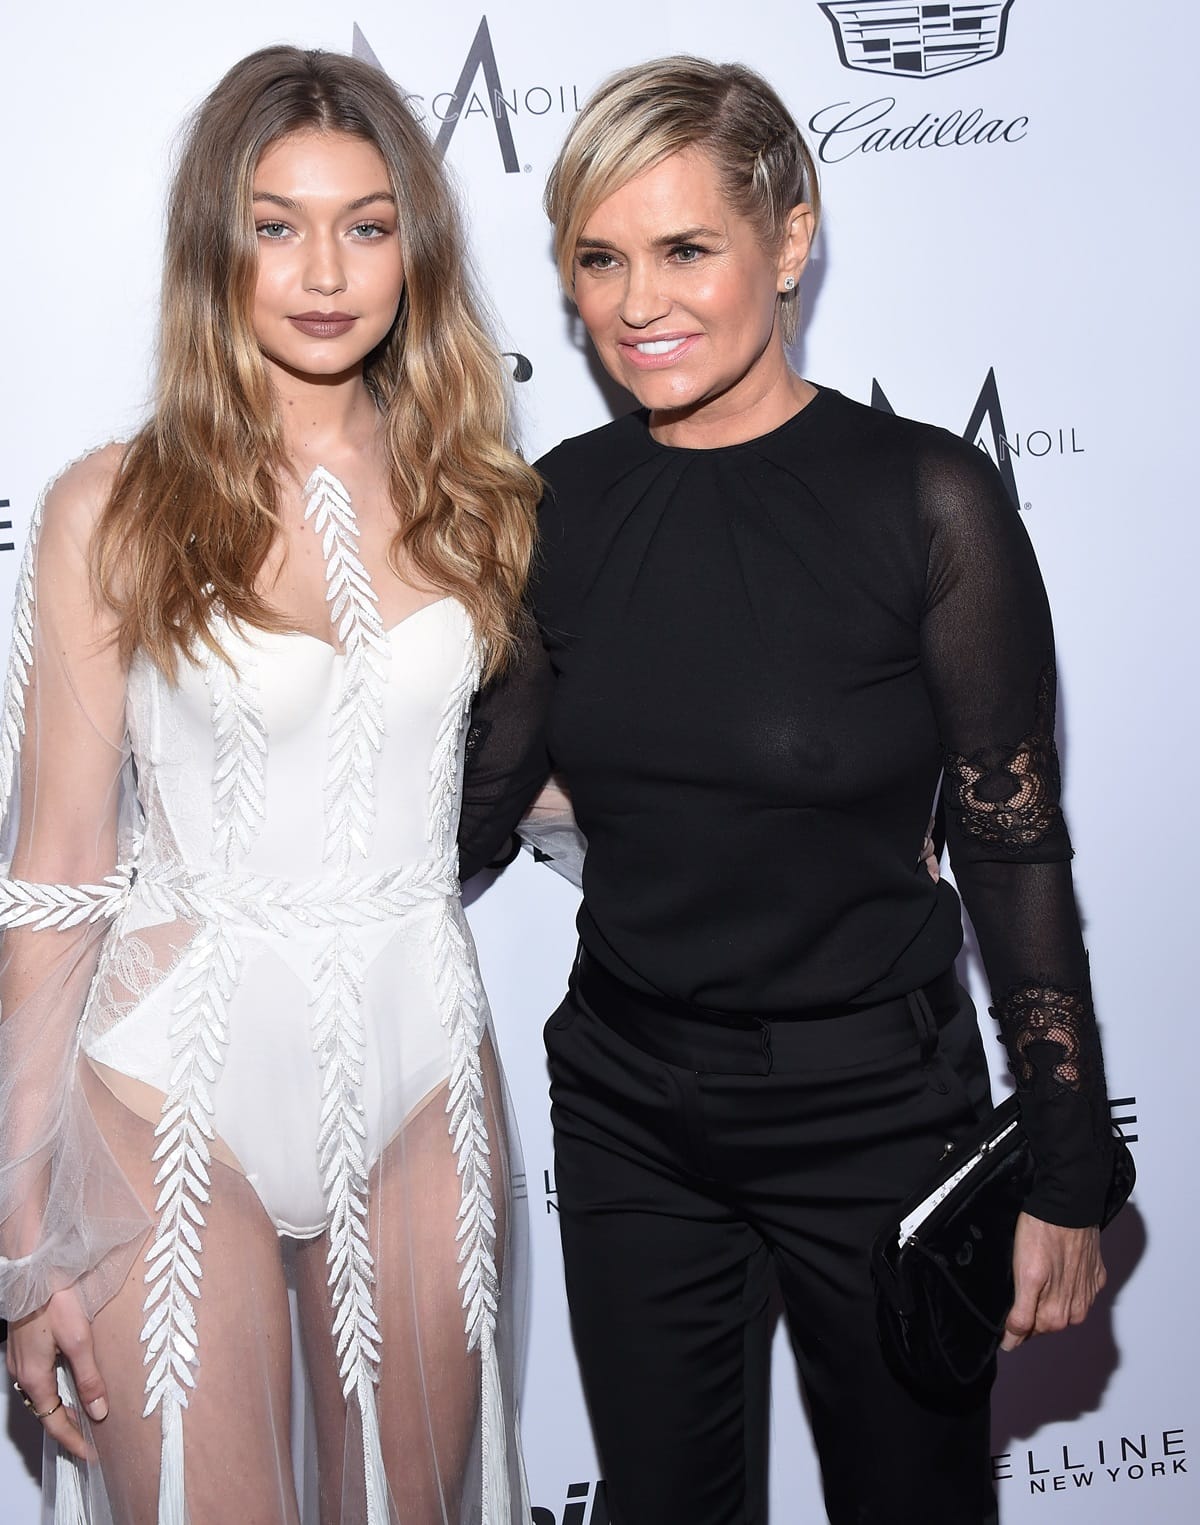 While Yolanda Hadid stands tall at 5ft 8 (172.7 cm), her daughter Gigi Hadid takes it up a notch, measuring in at an impressive 5ft 9 ¼ (175.9 cm)